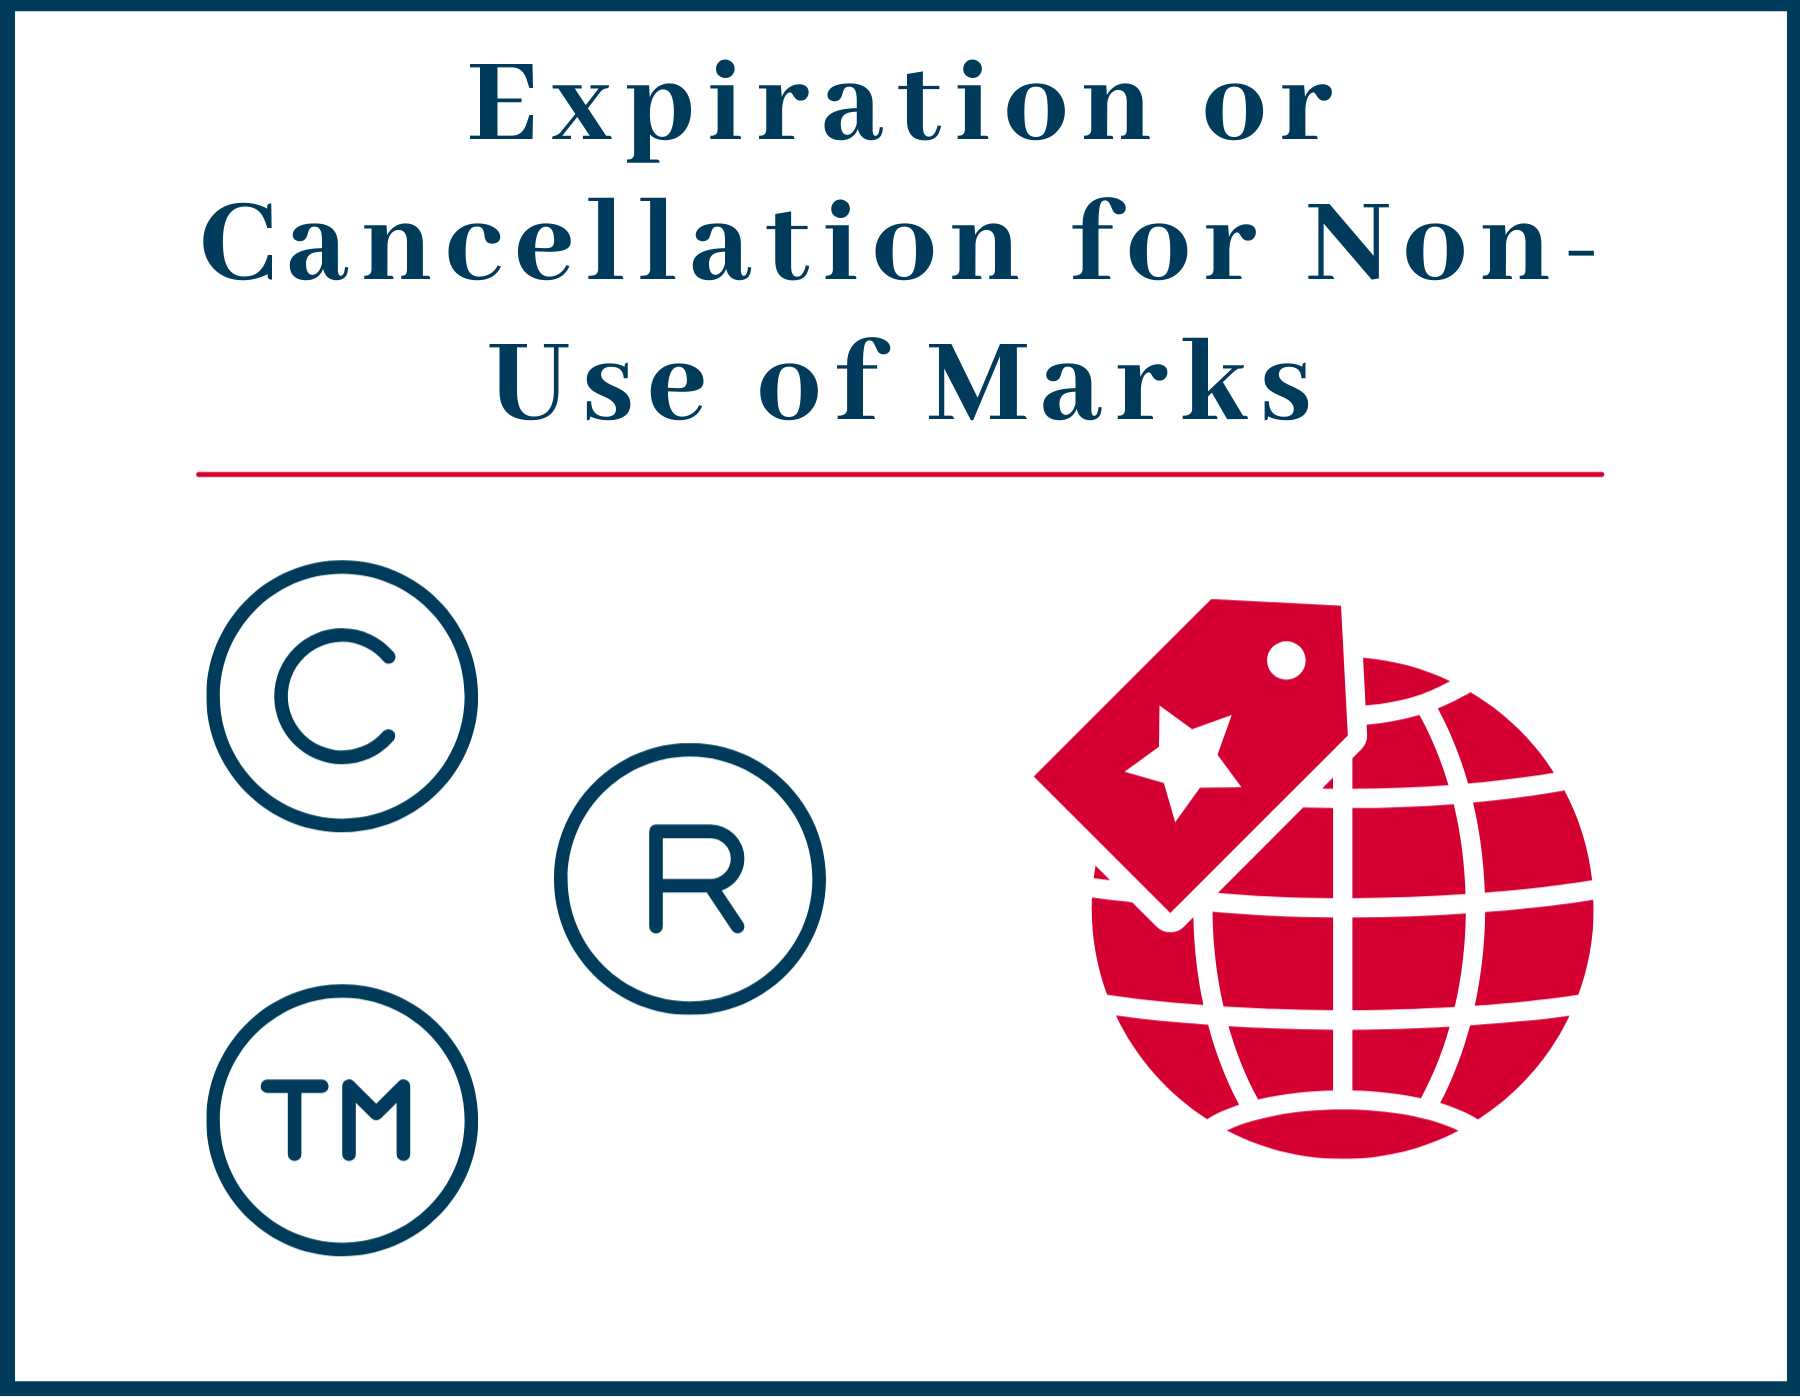 Expiration or Cancellation for Non-Use of Marks: A wait that has taken more than seven years